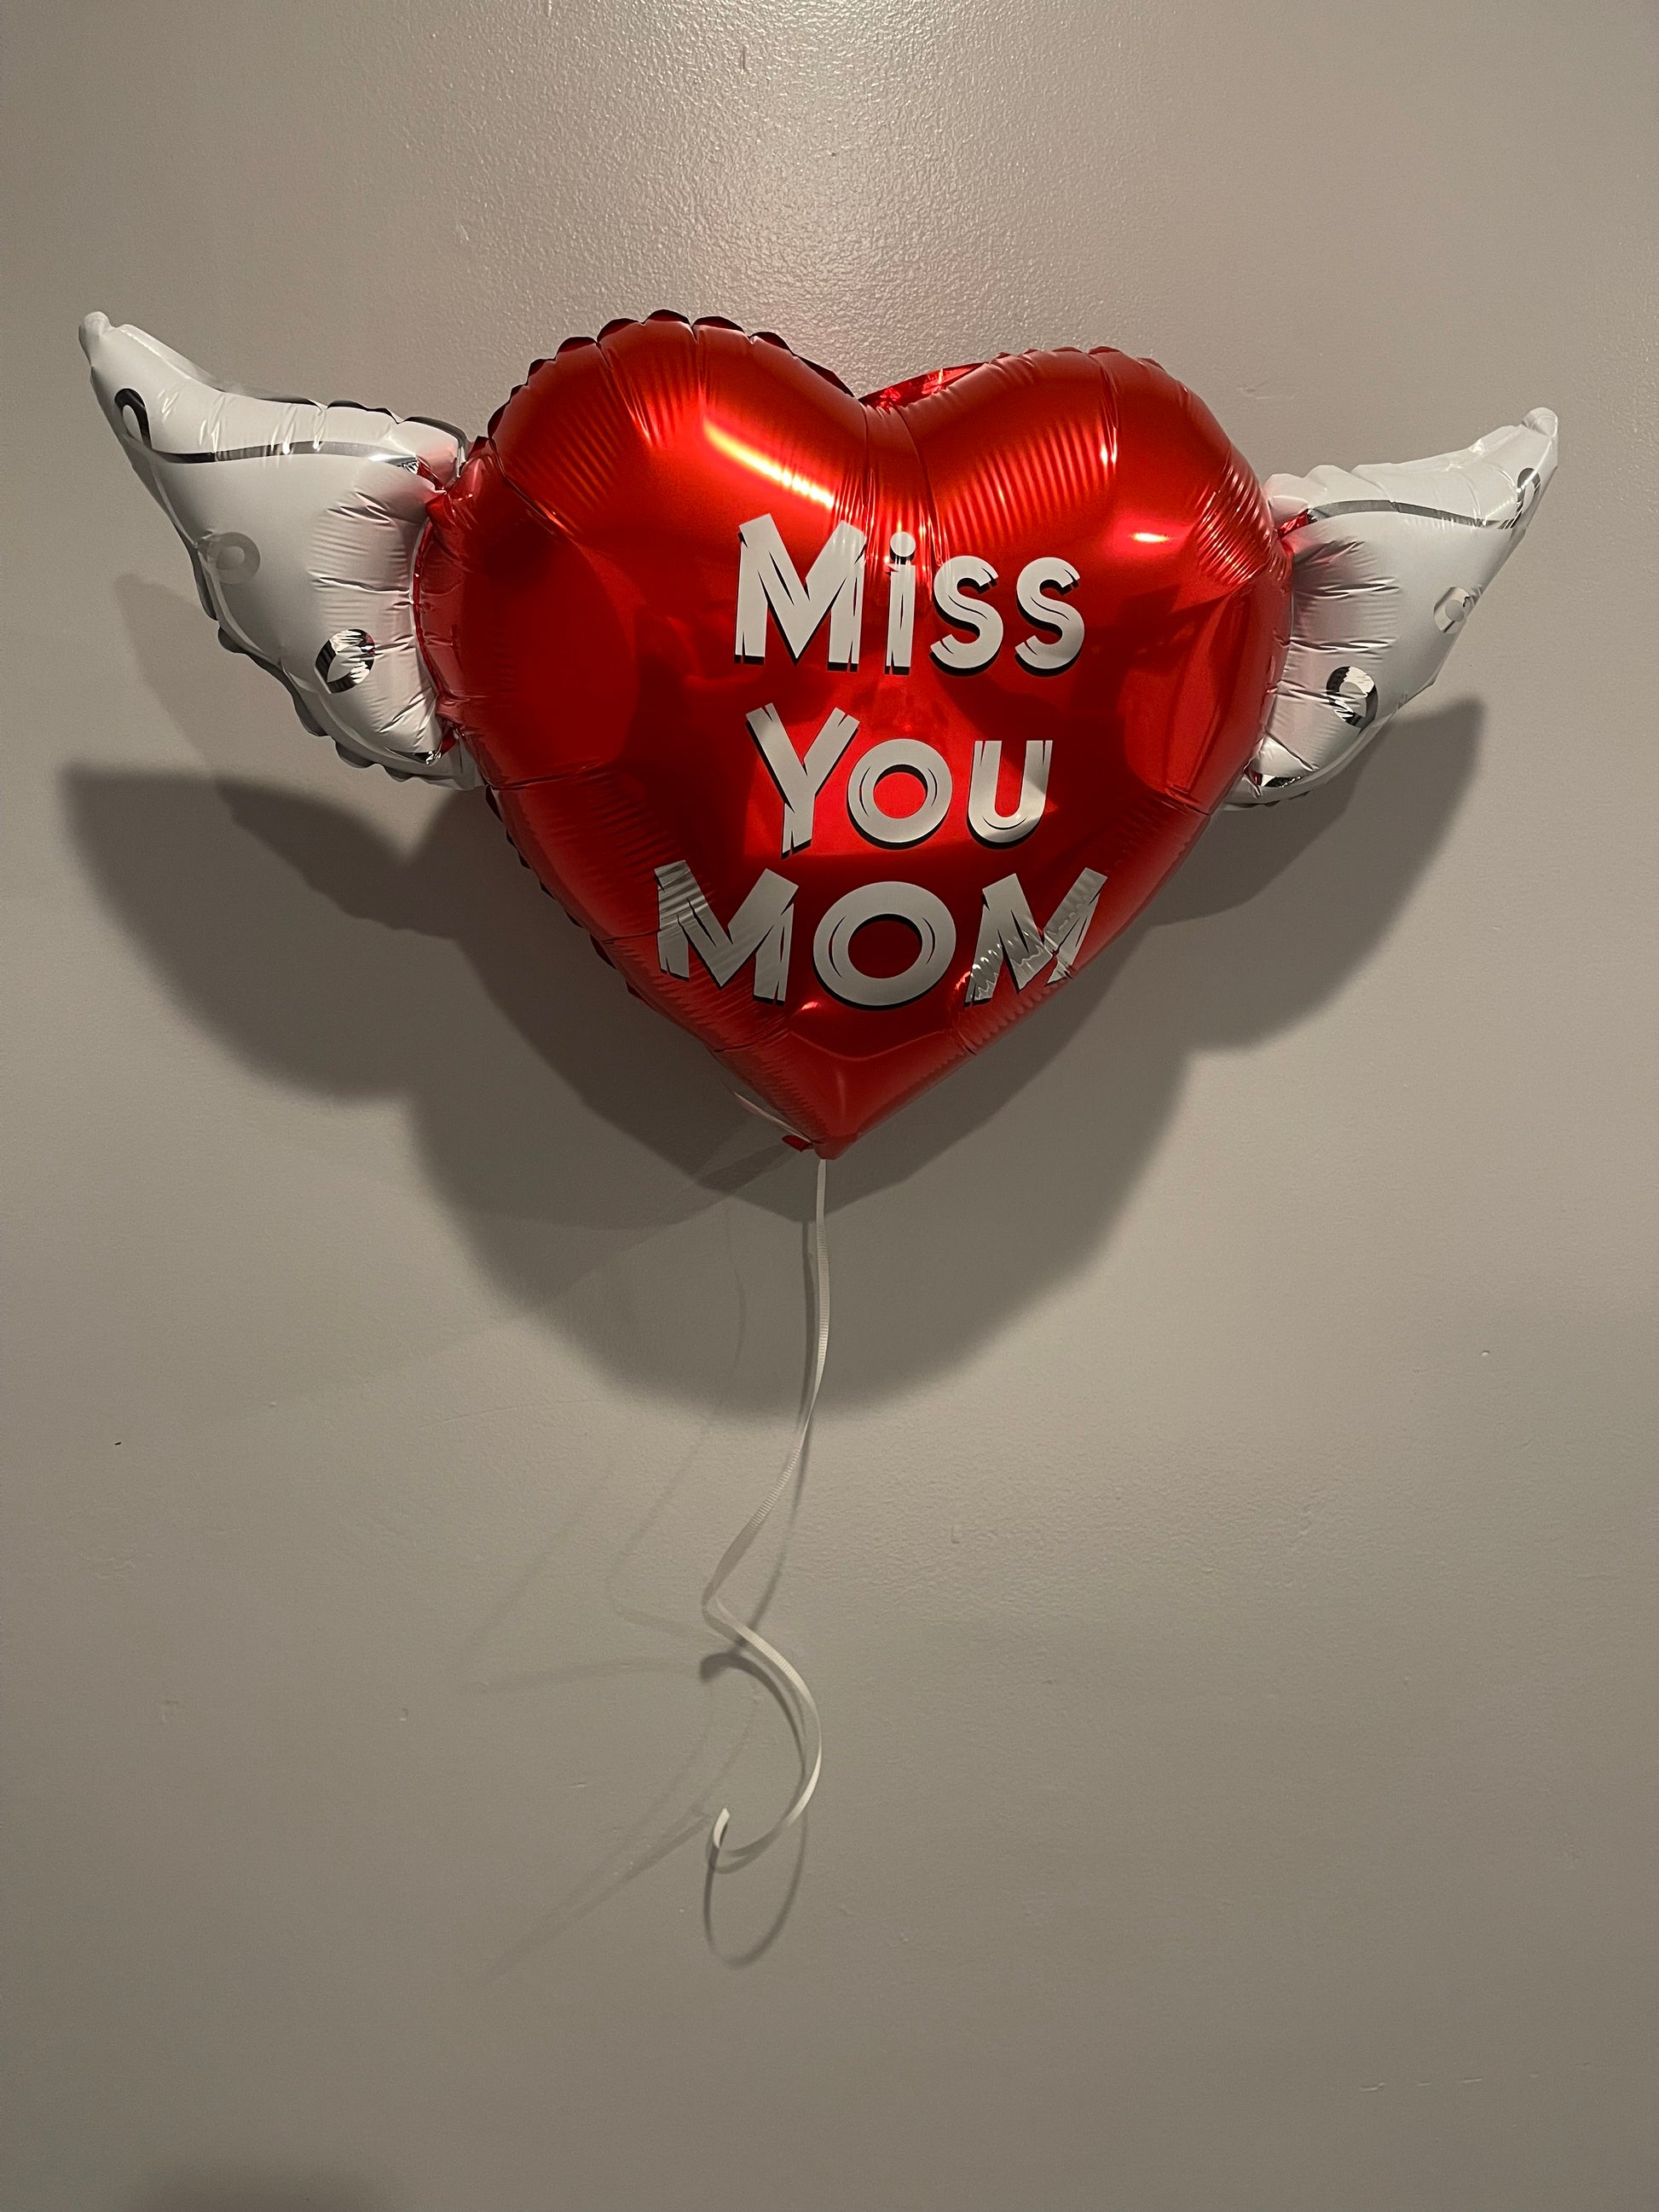 Miss You Mom Heavenly Balloons ™ Heart Shaped with angel wings (Red)